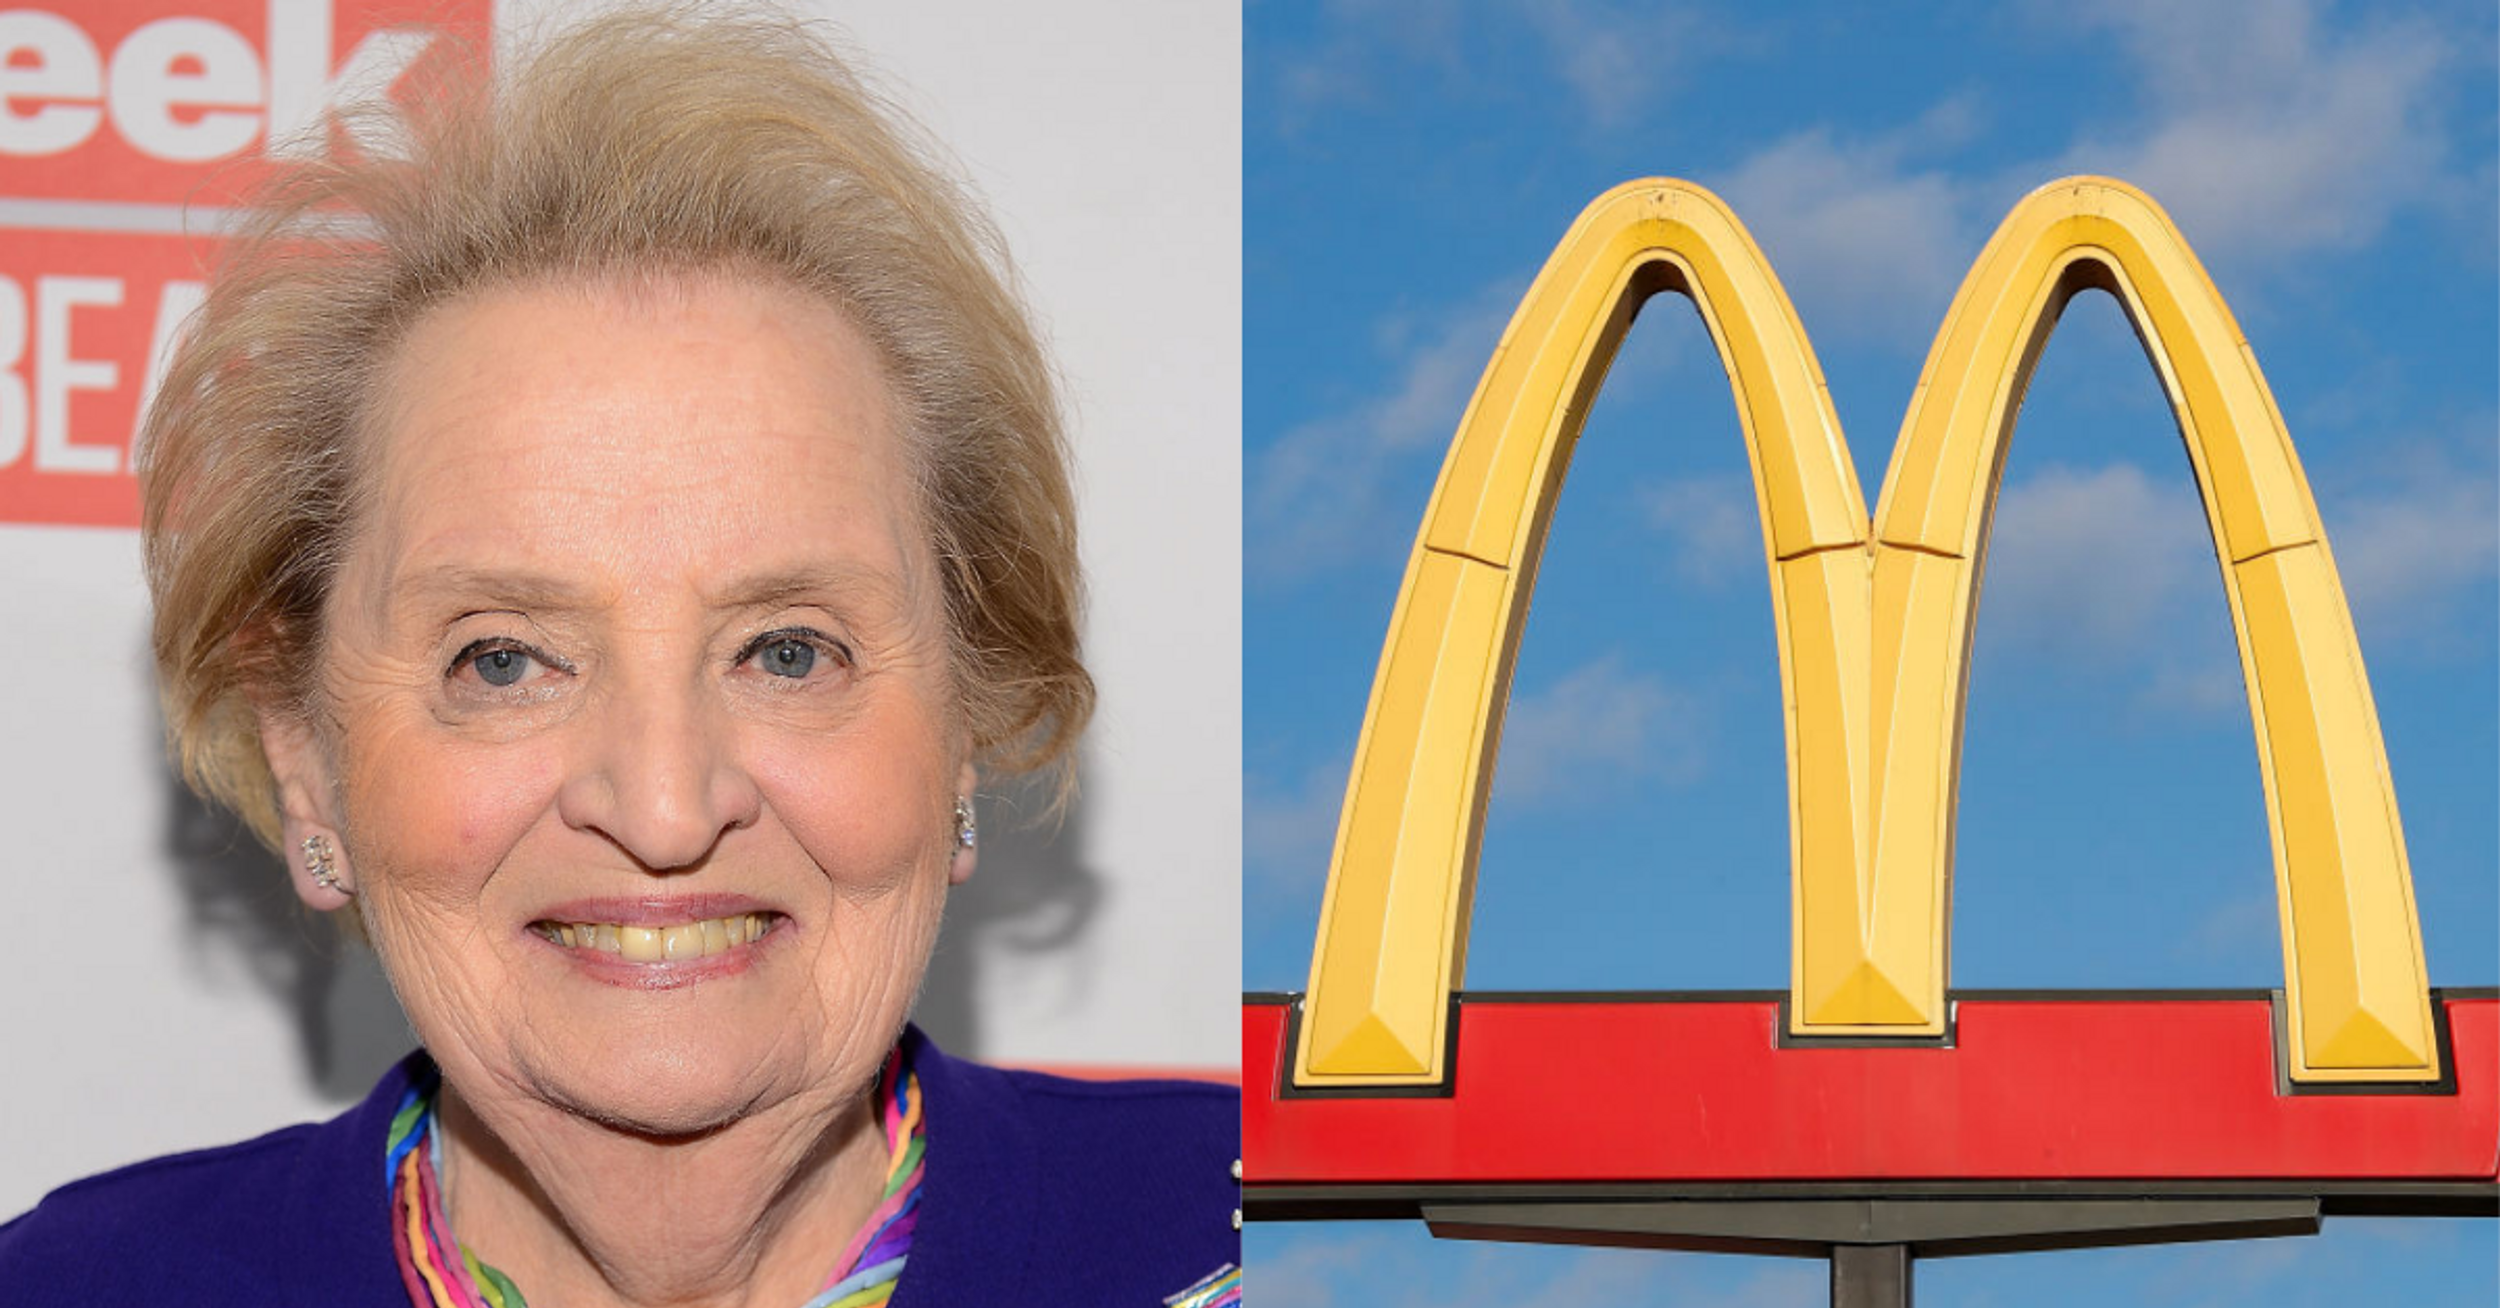 Photo Of Guantanamo Bay McDonald's Flag At Half Mast For Madeleine Albright Weirds Out Twitter